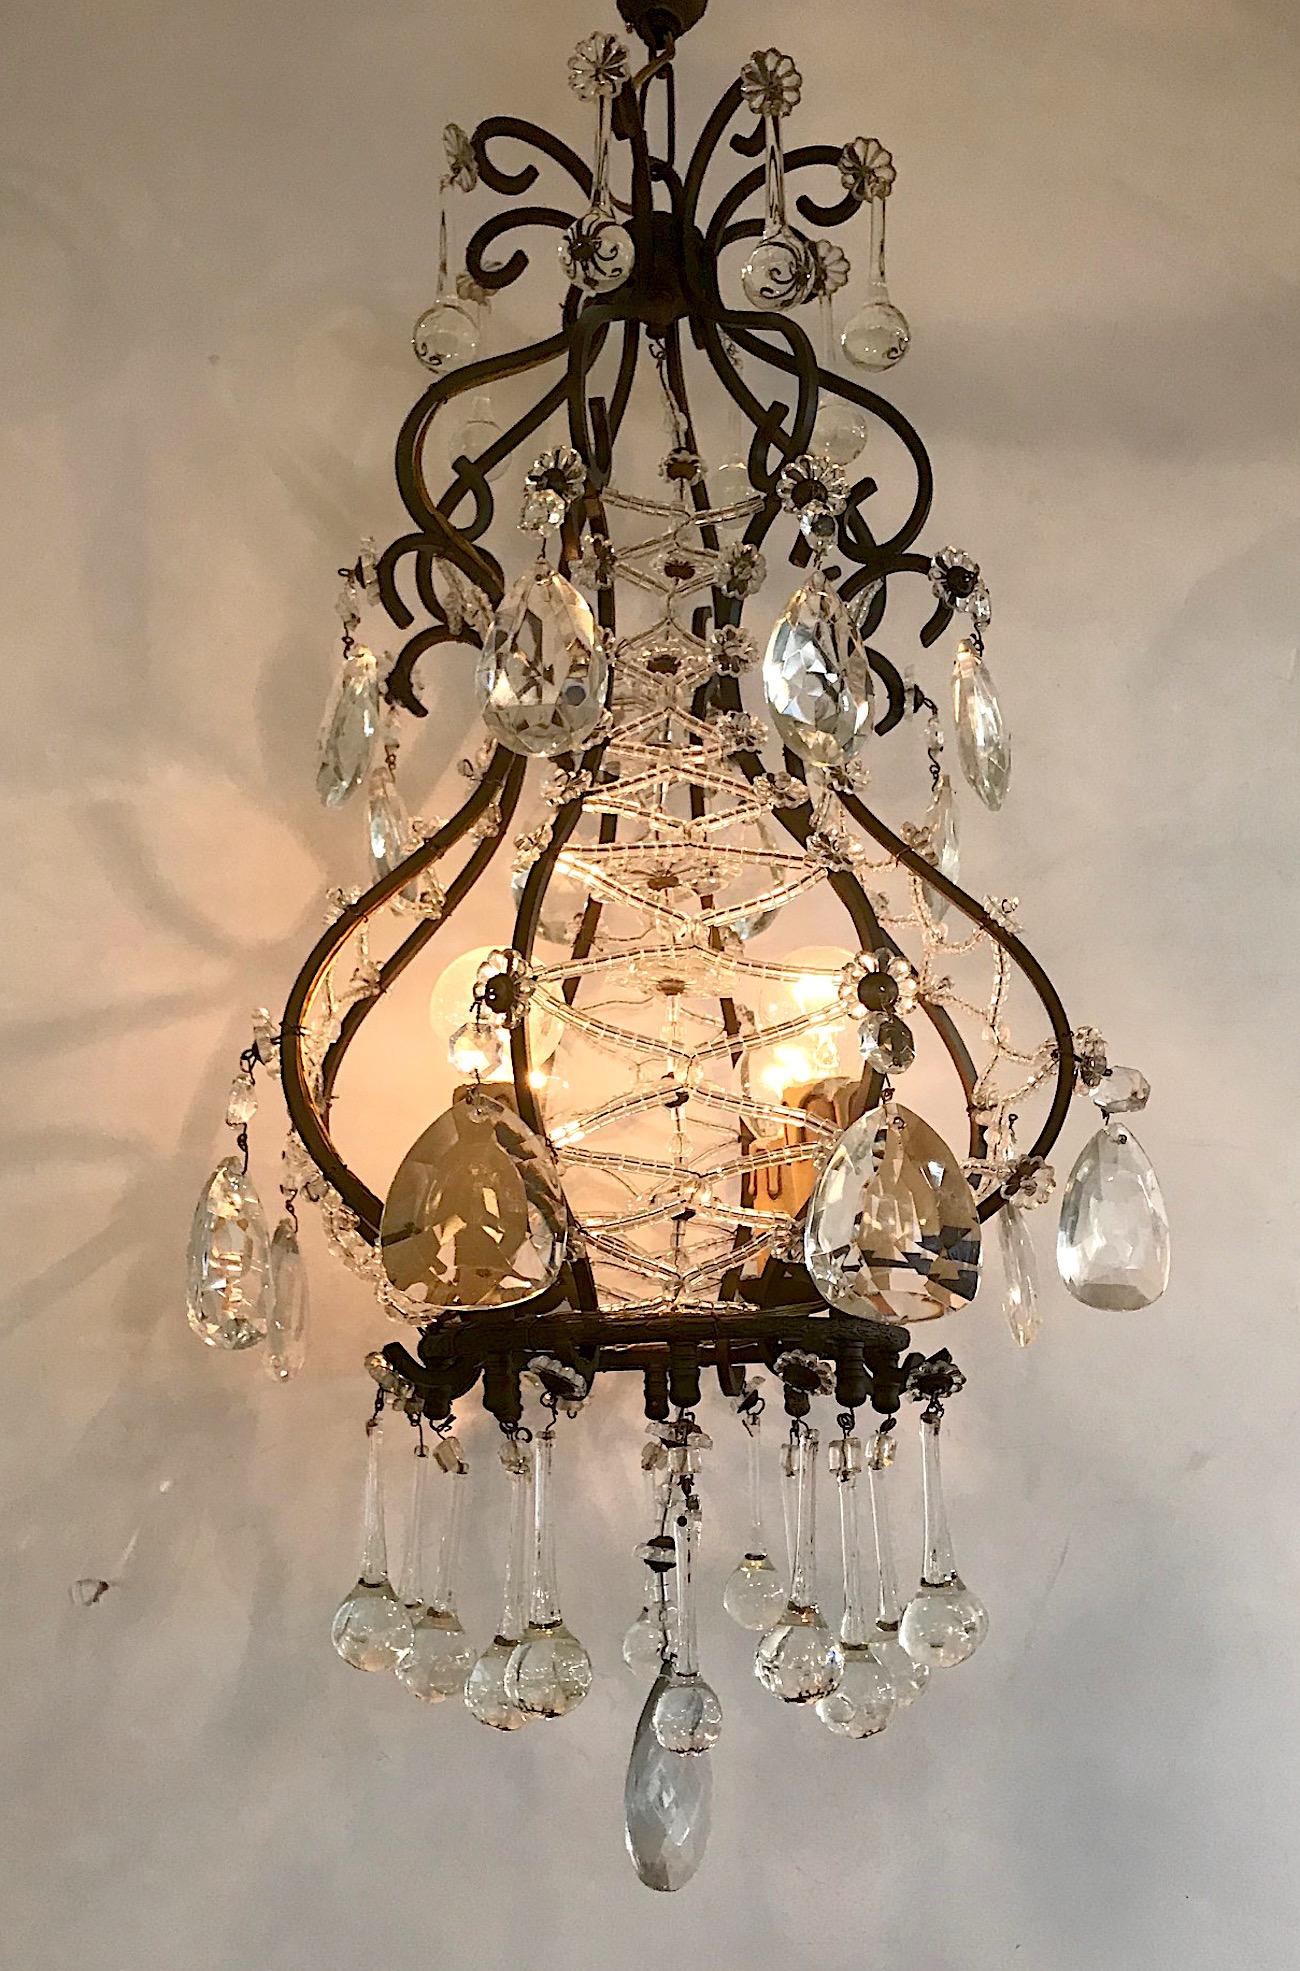 A stylish and charming 1950s Italian chandelier in patinated black iron with crystal and glass accents. The chandelier is comprised of 8 vertical scrolled iron supports. Four pair are wired in a criss cross pattern with handmade glass beads allowing